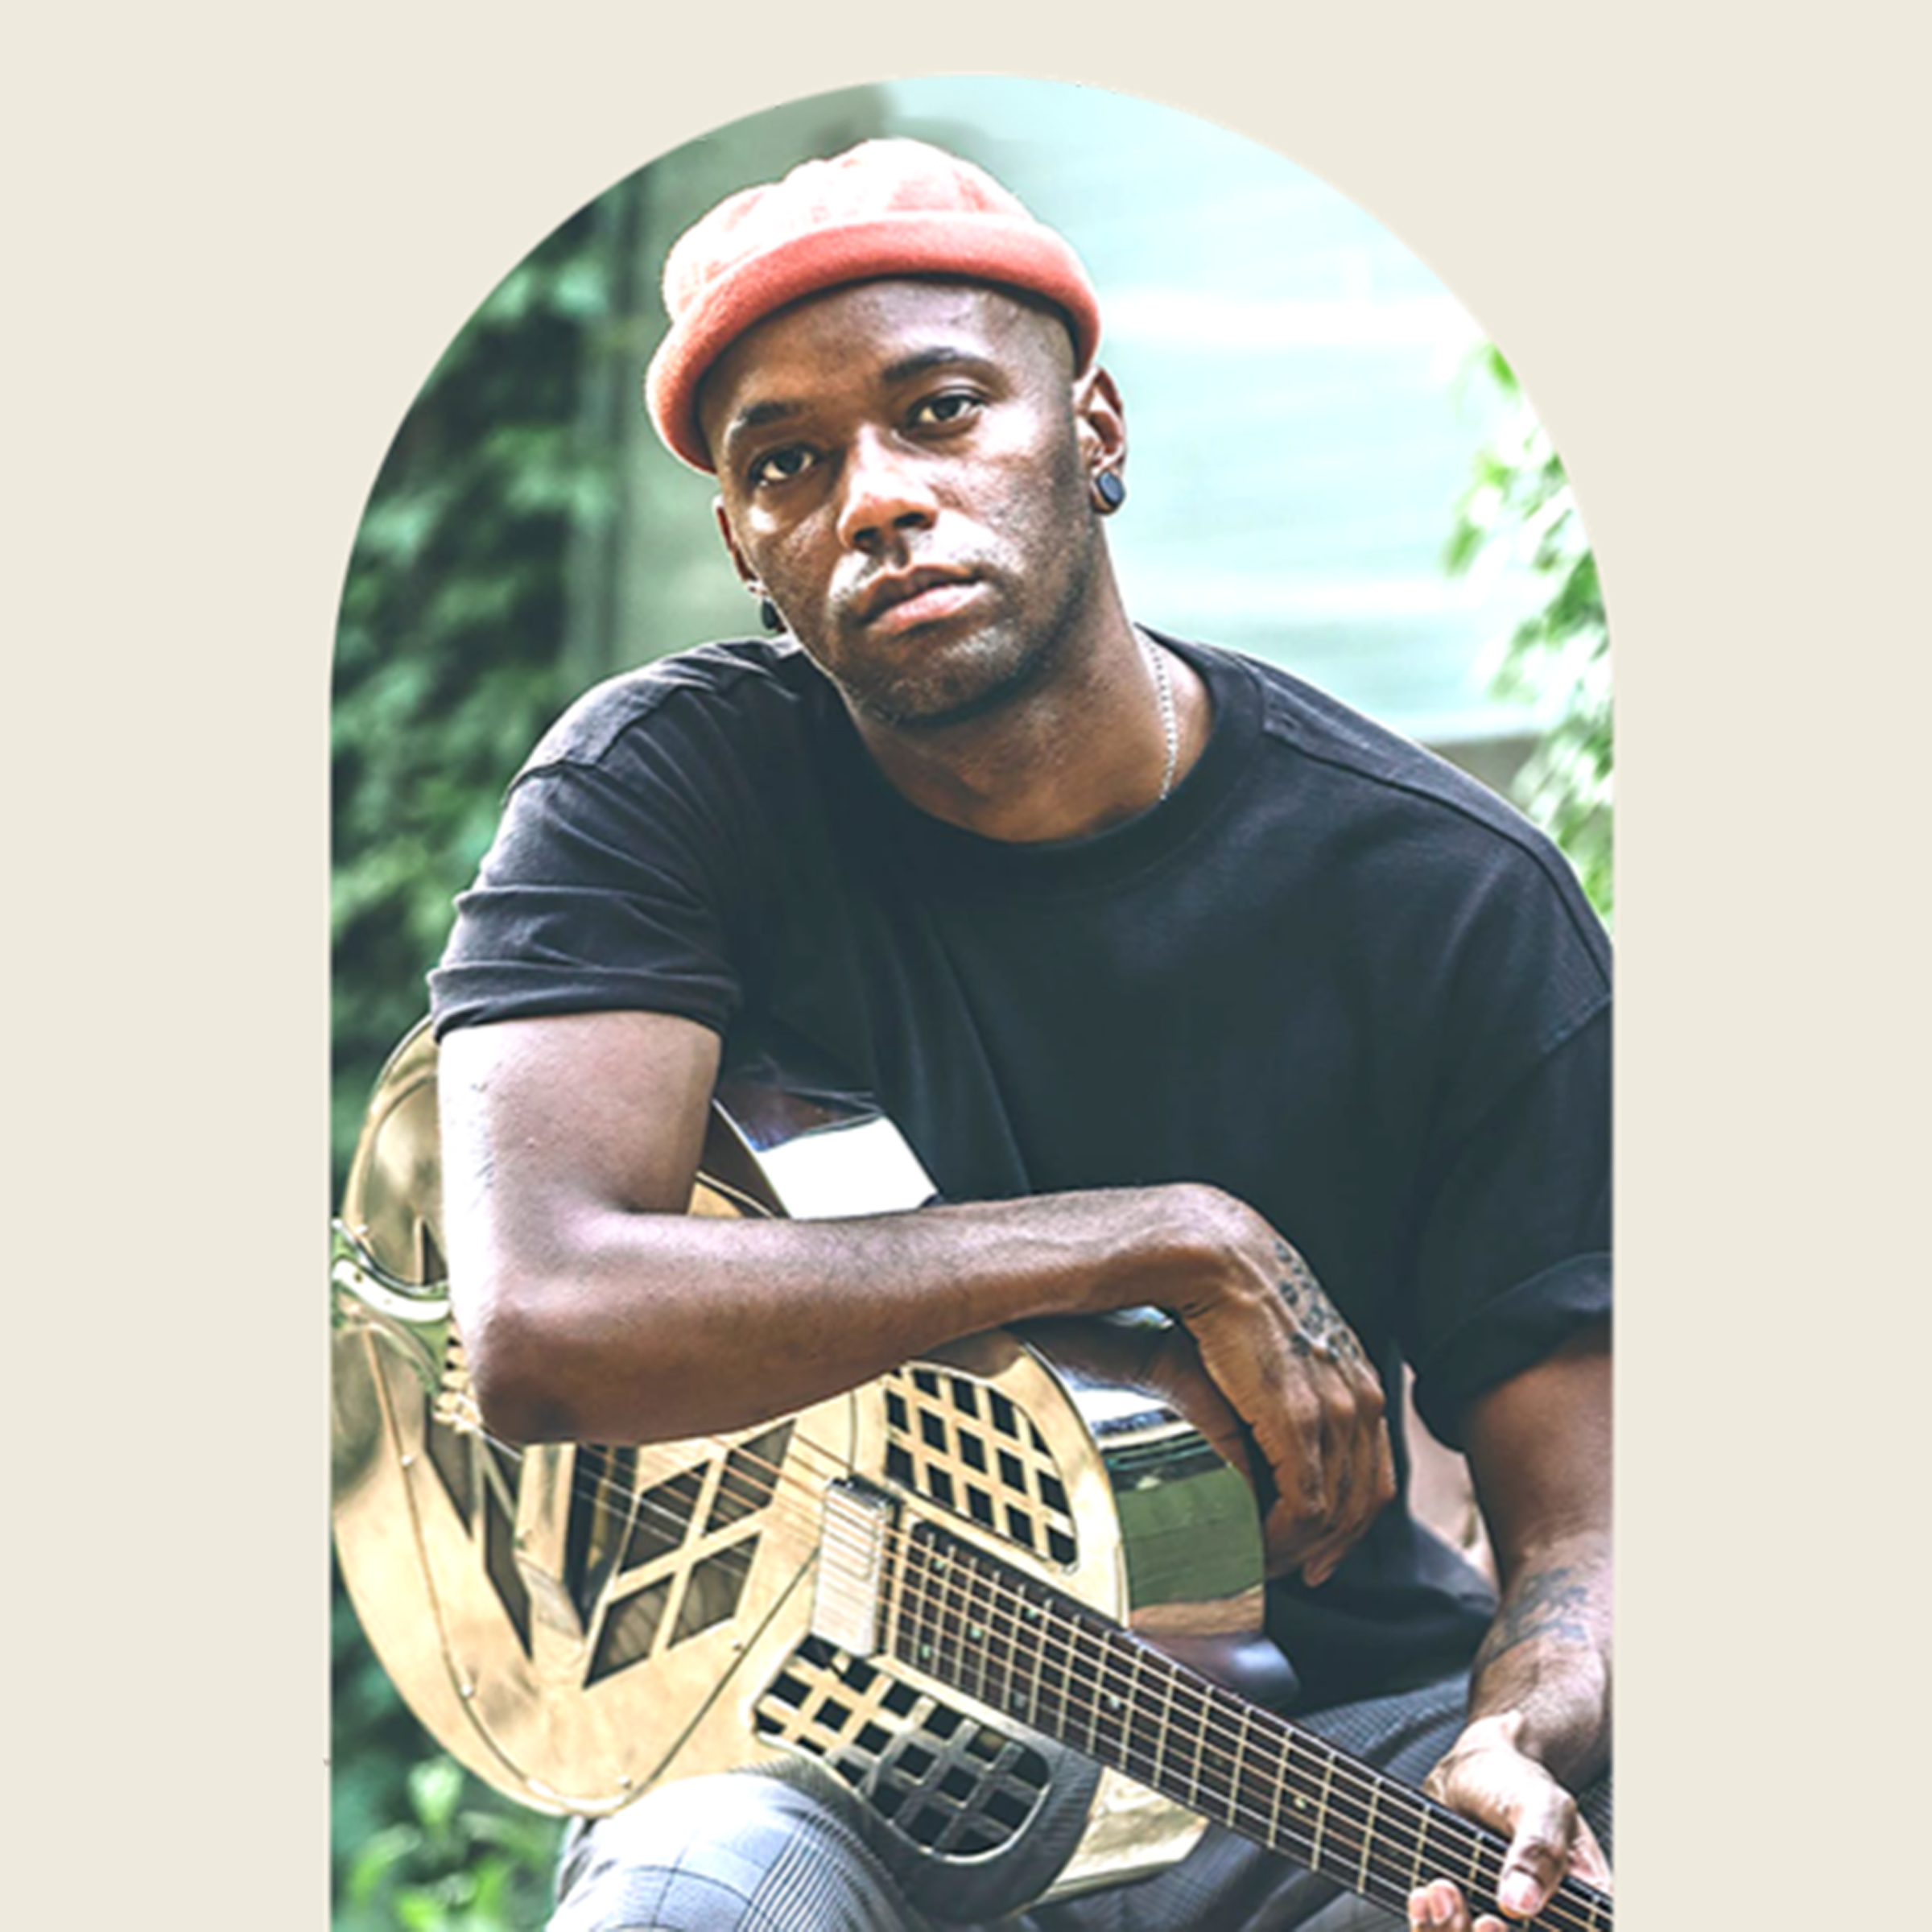 Artist of the Month: Keb' Mo'